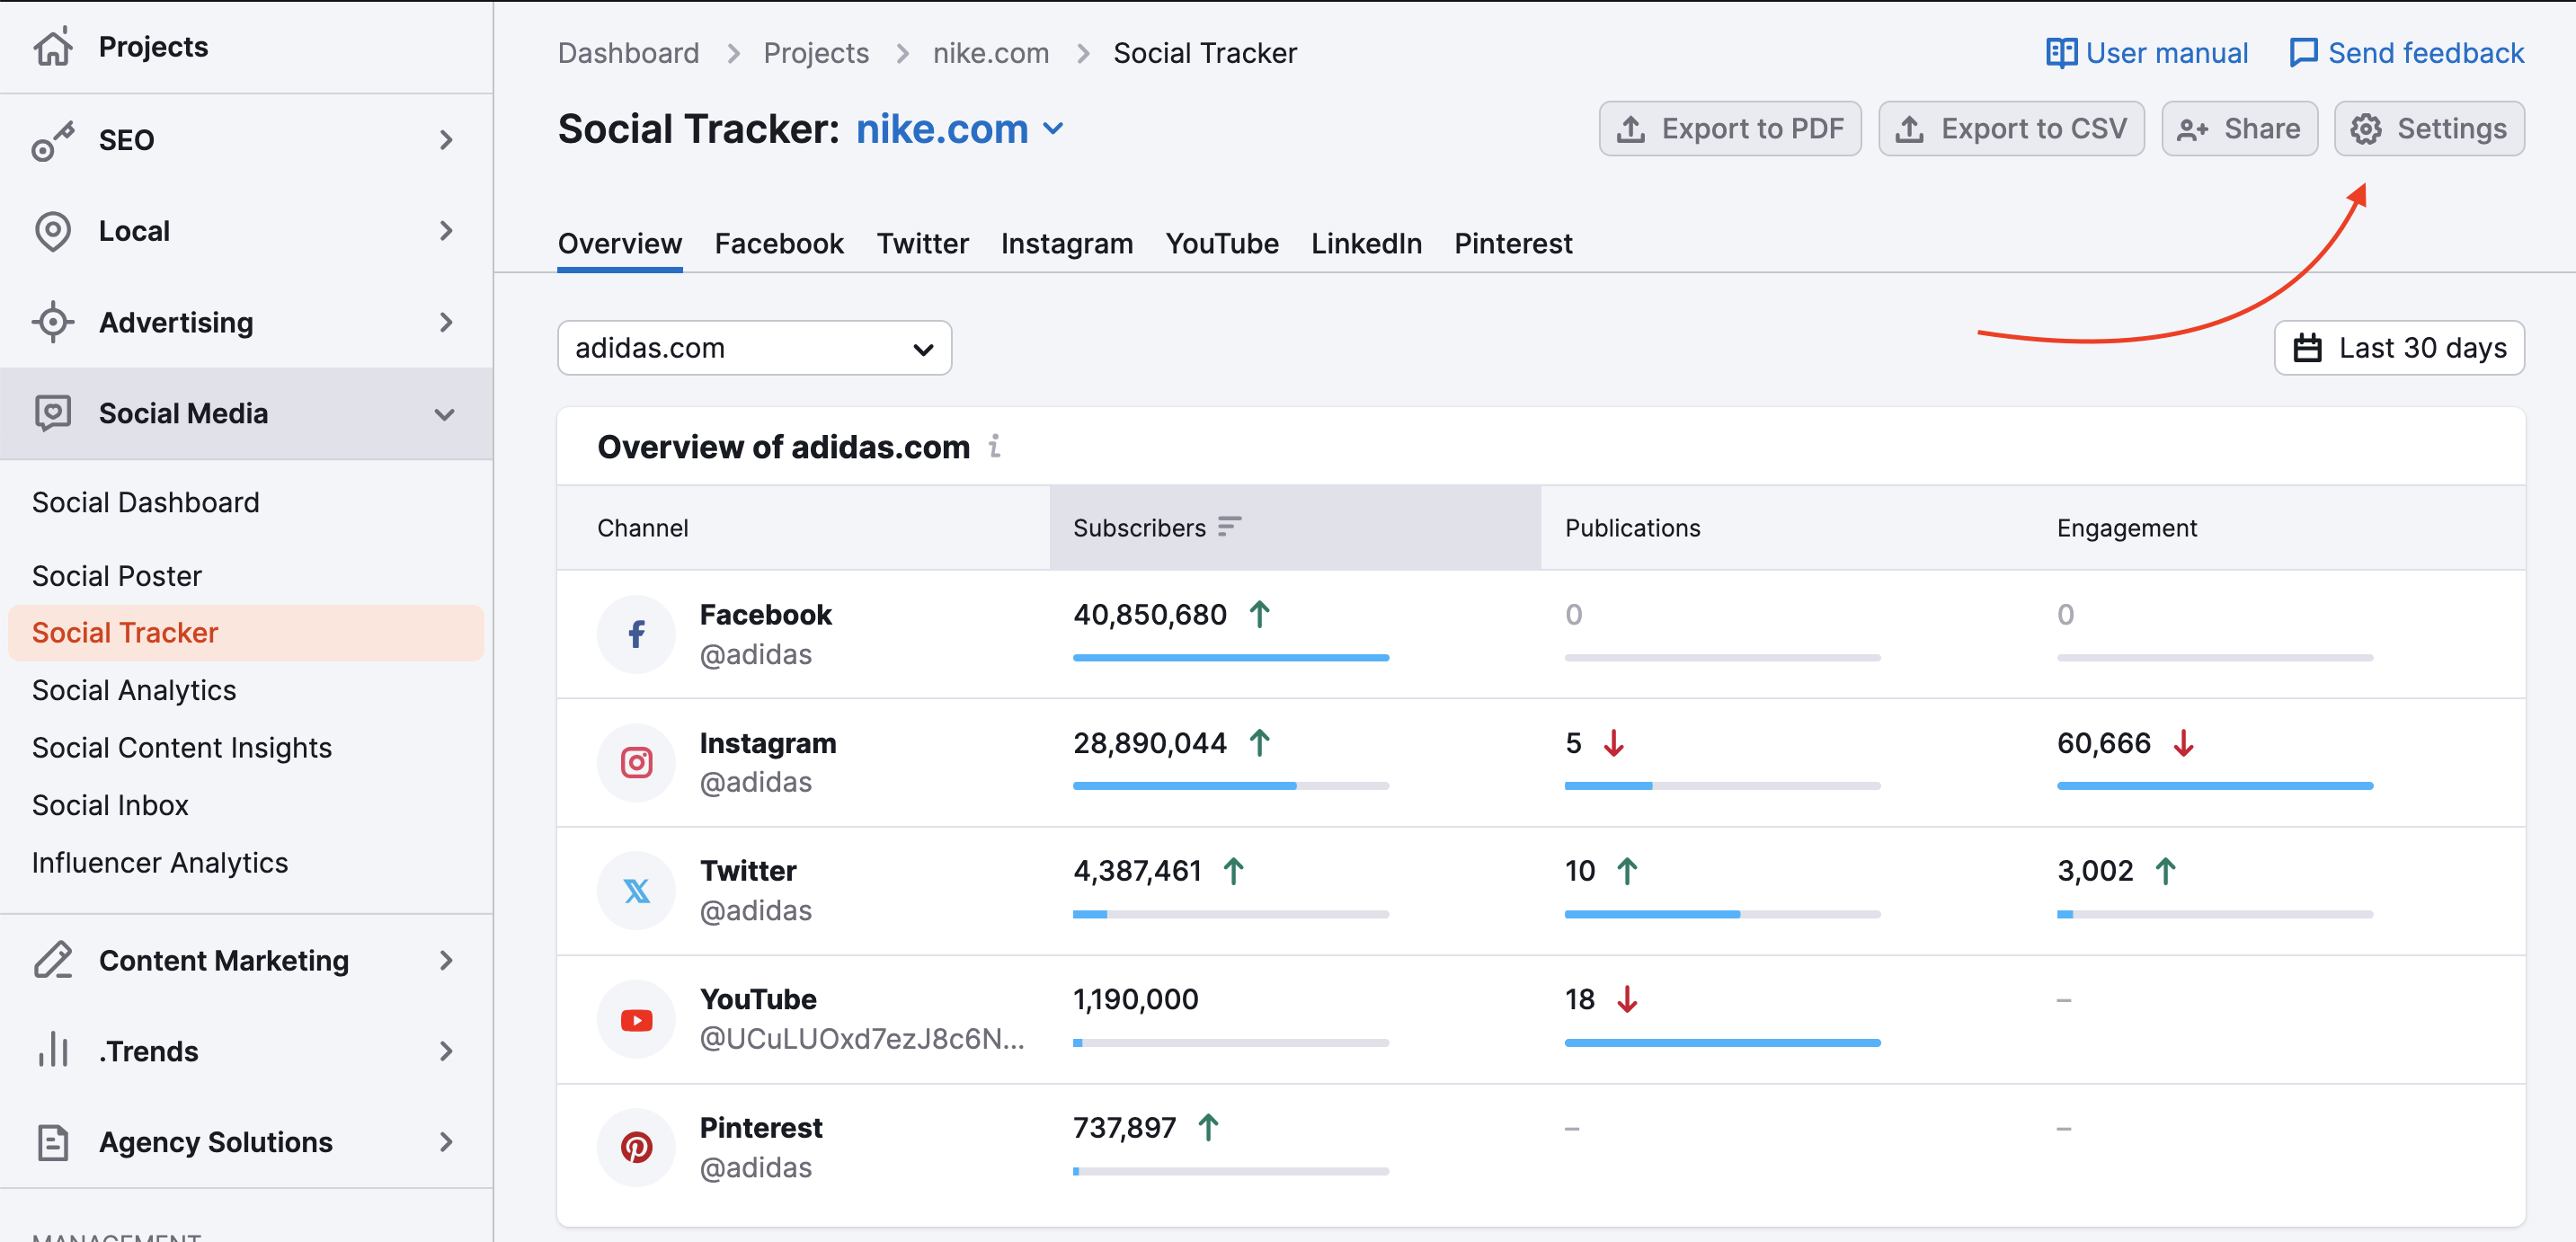 An example of the Social Tracker Overview report with a red arrow pointing to the Settings button in the top-right corner. 